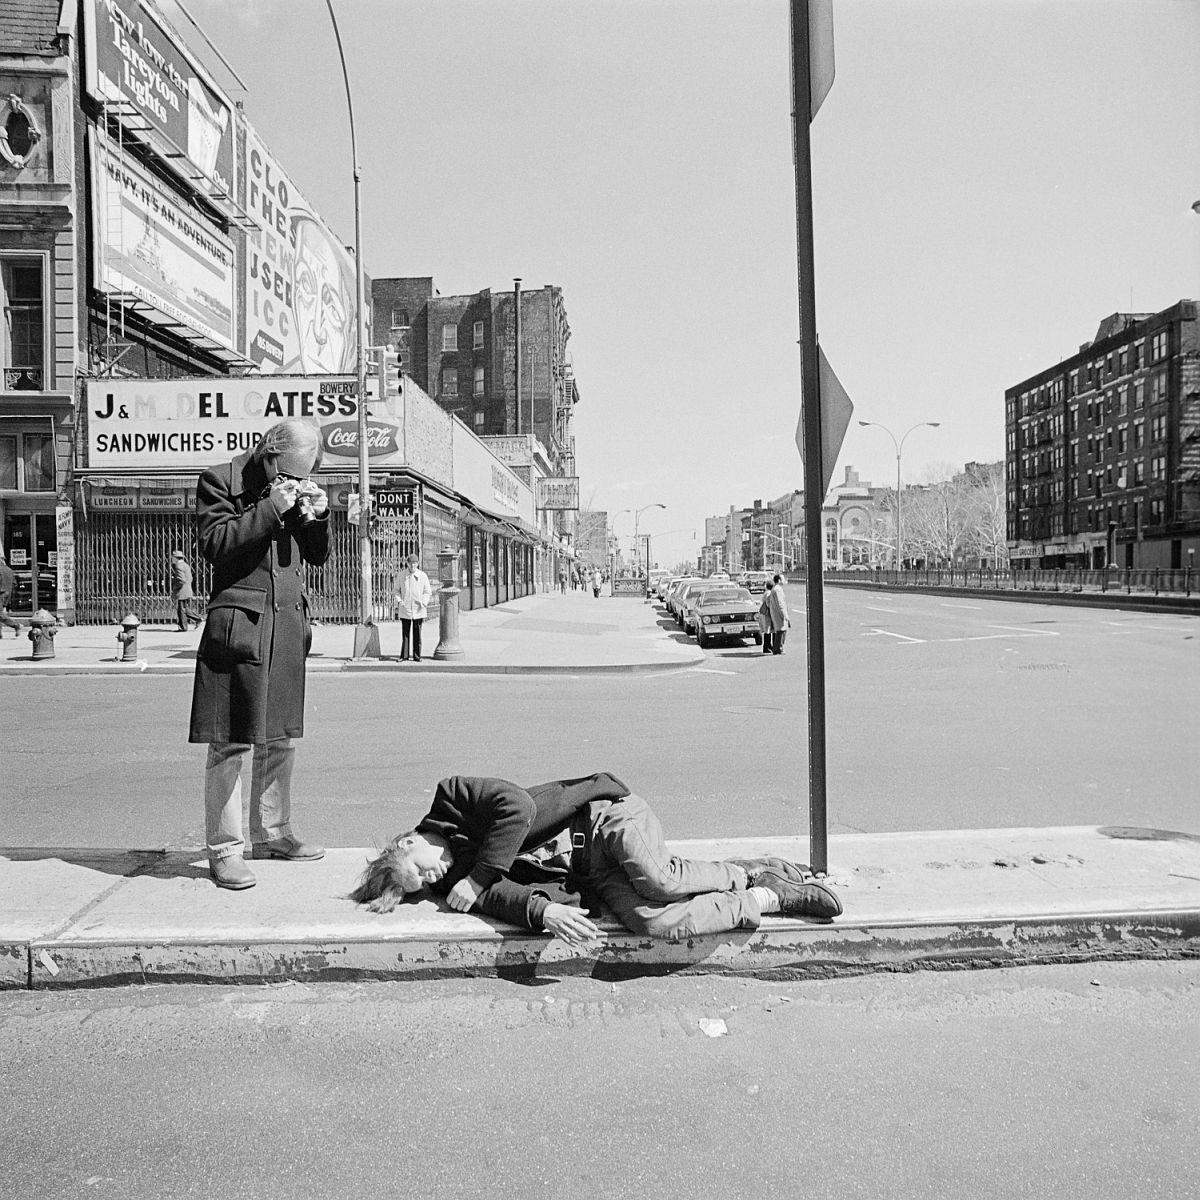 Meryl Meisler: LES YES! Photographs of the Lower East Side in the '70s & '80s